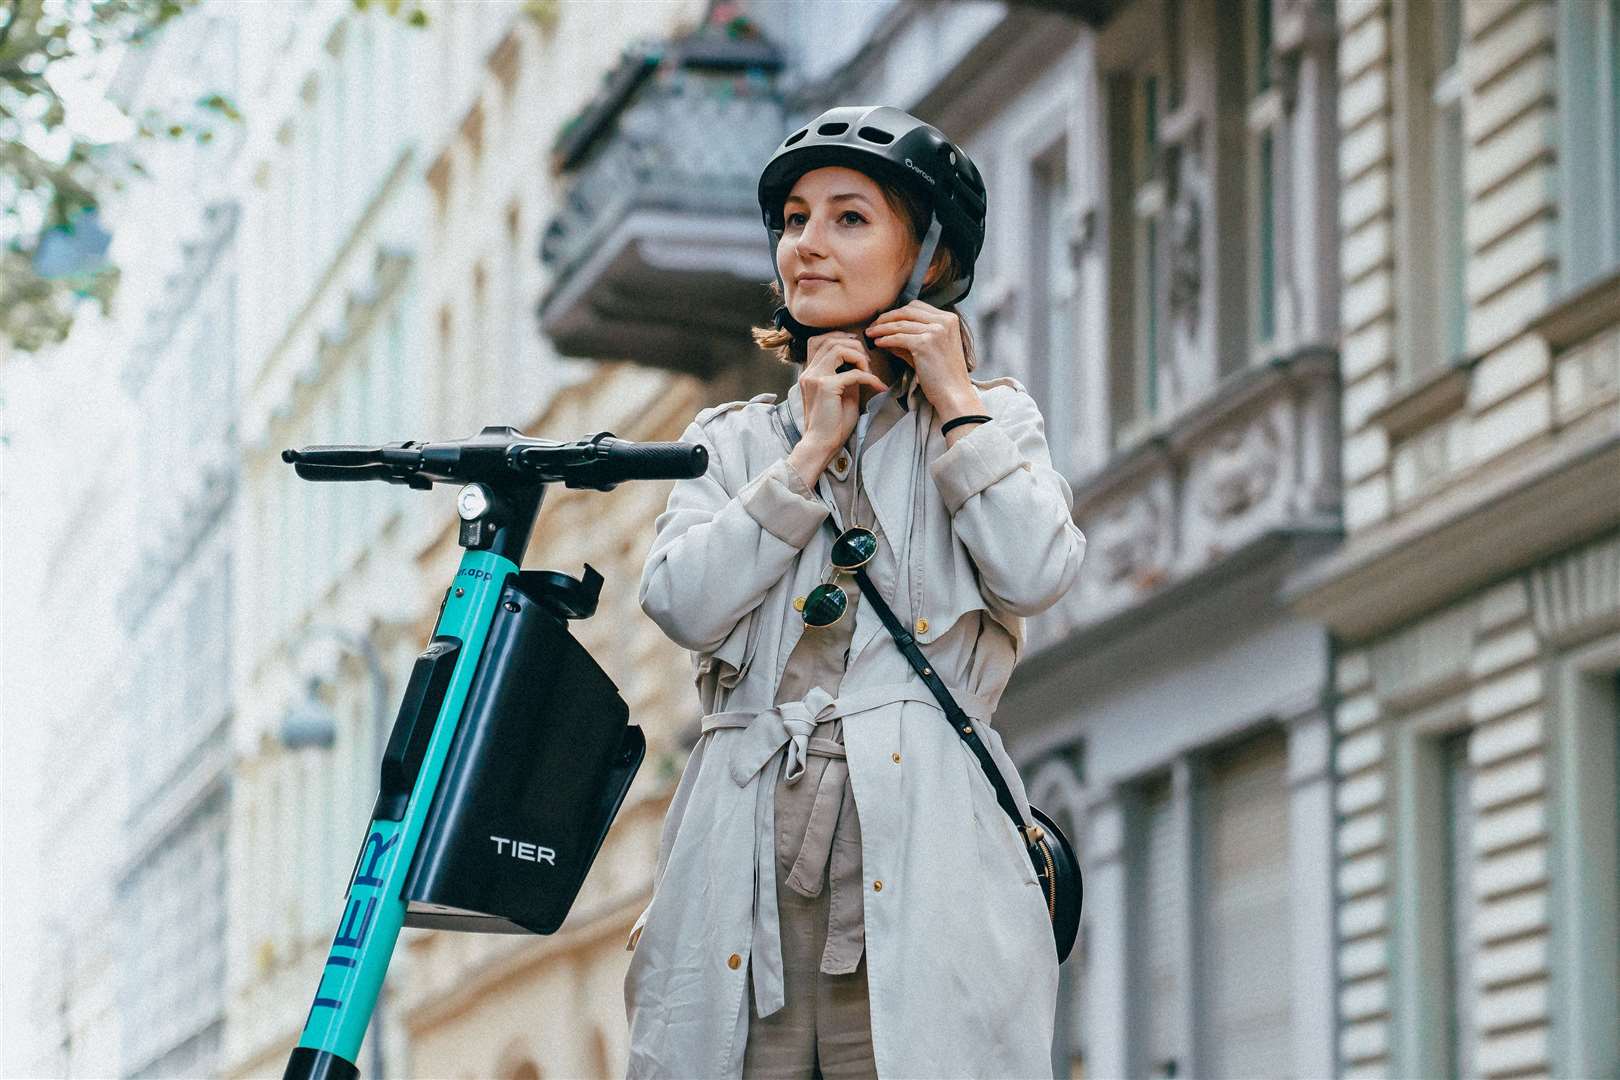 E-scooters could soon be coming to Canterbury. Picture: TIER